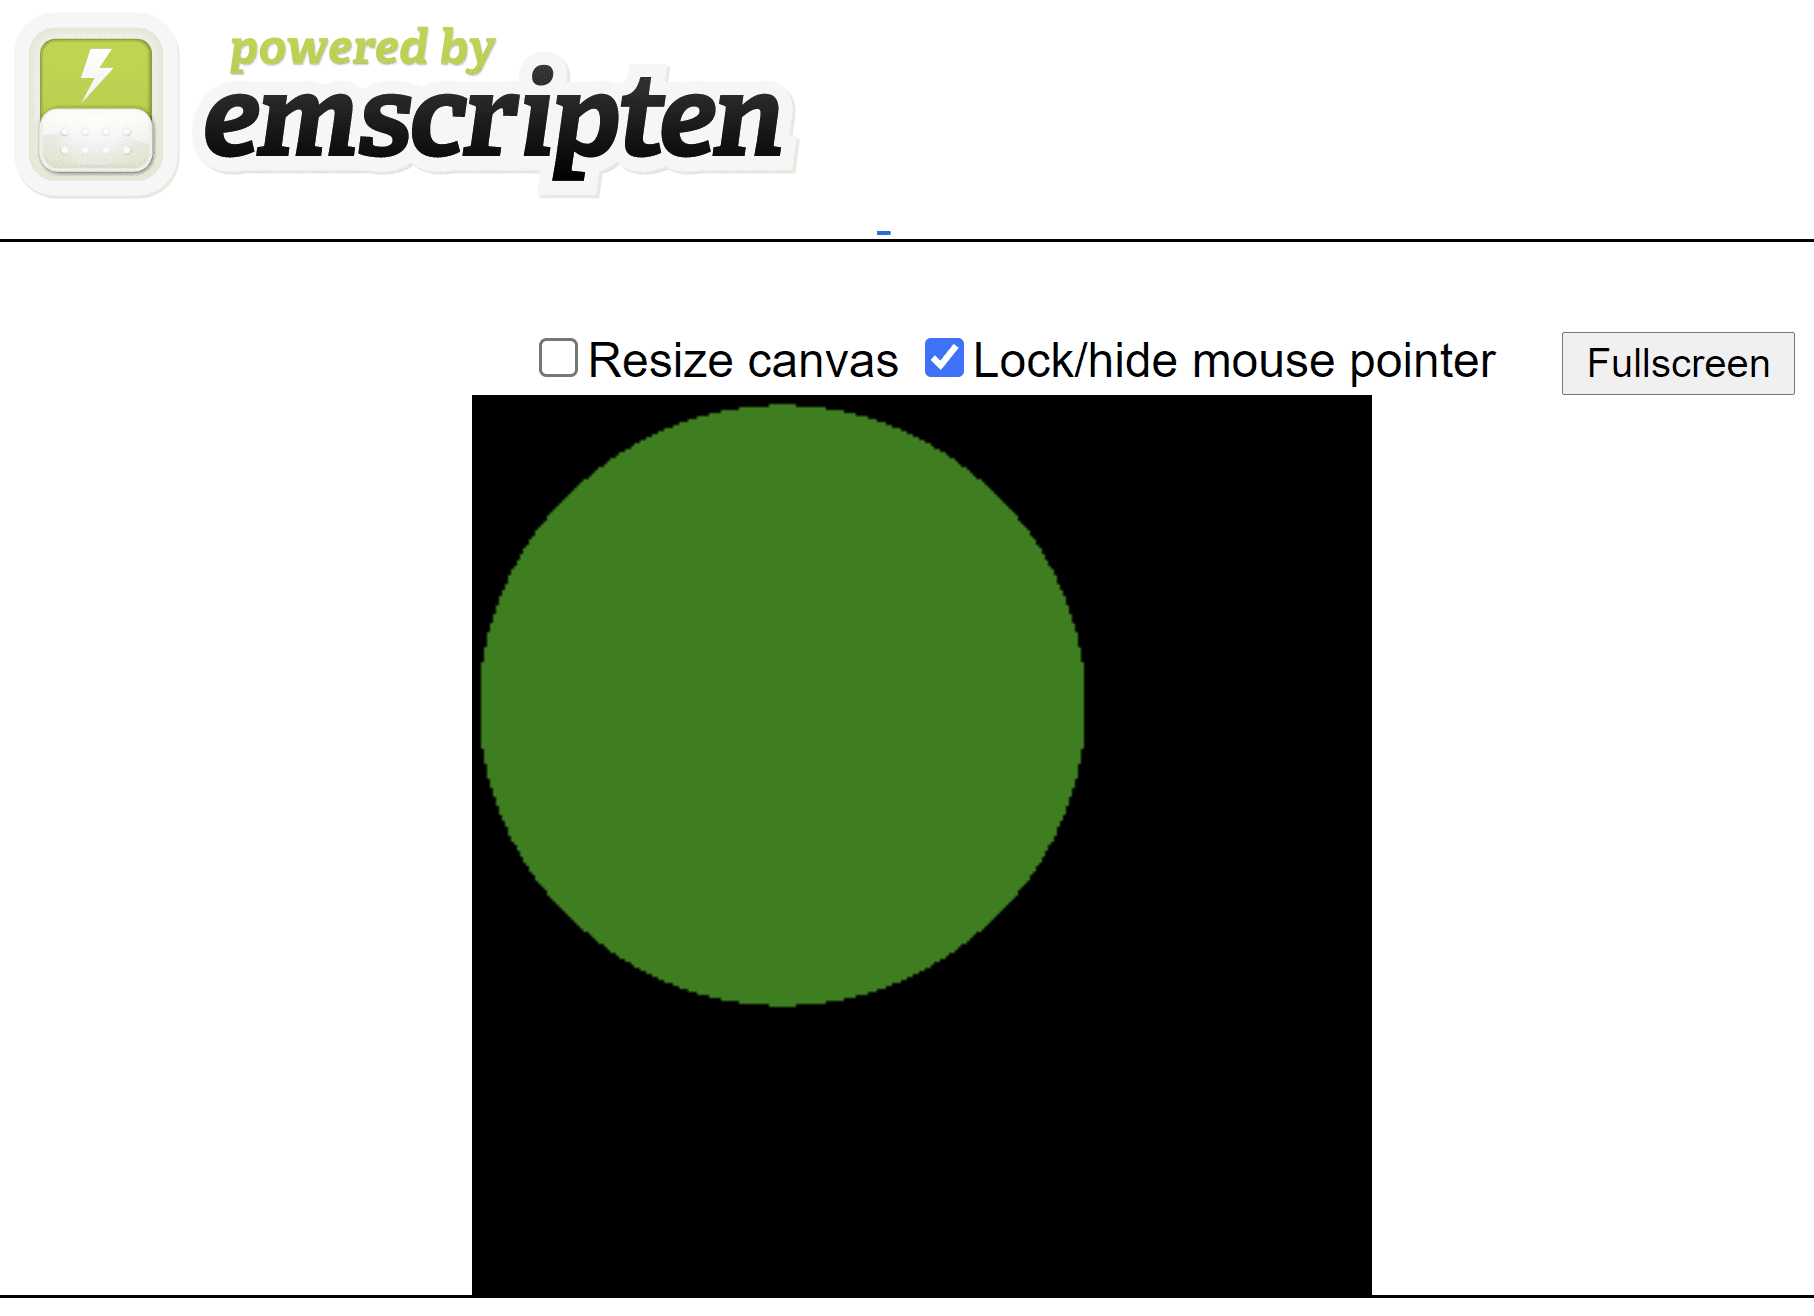 Emscripten-generated HTML page showing a green circle on a black square canvas.